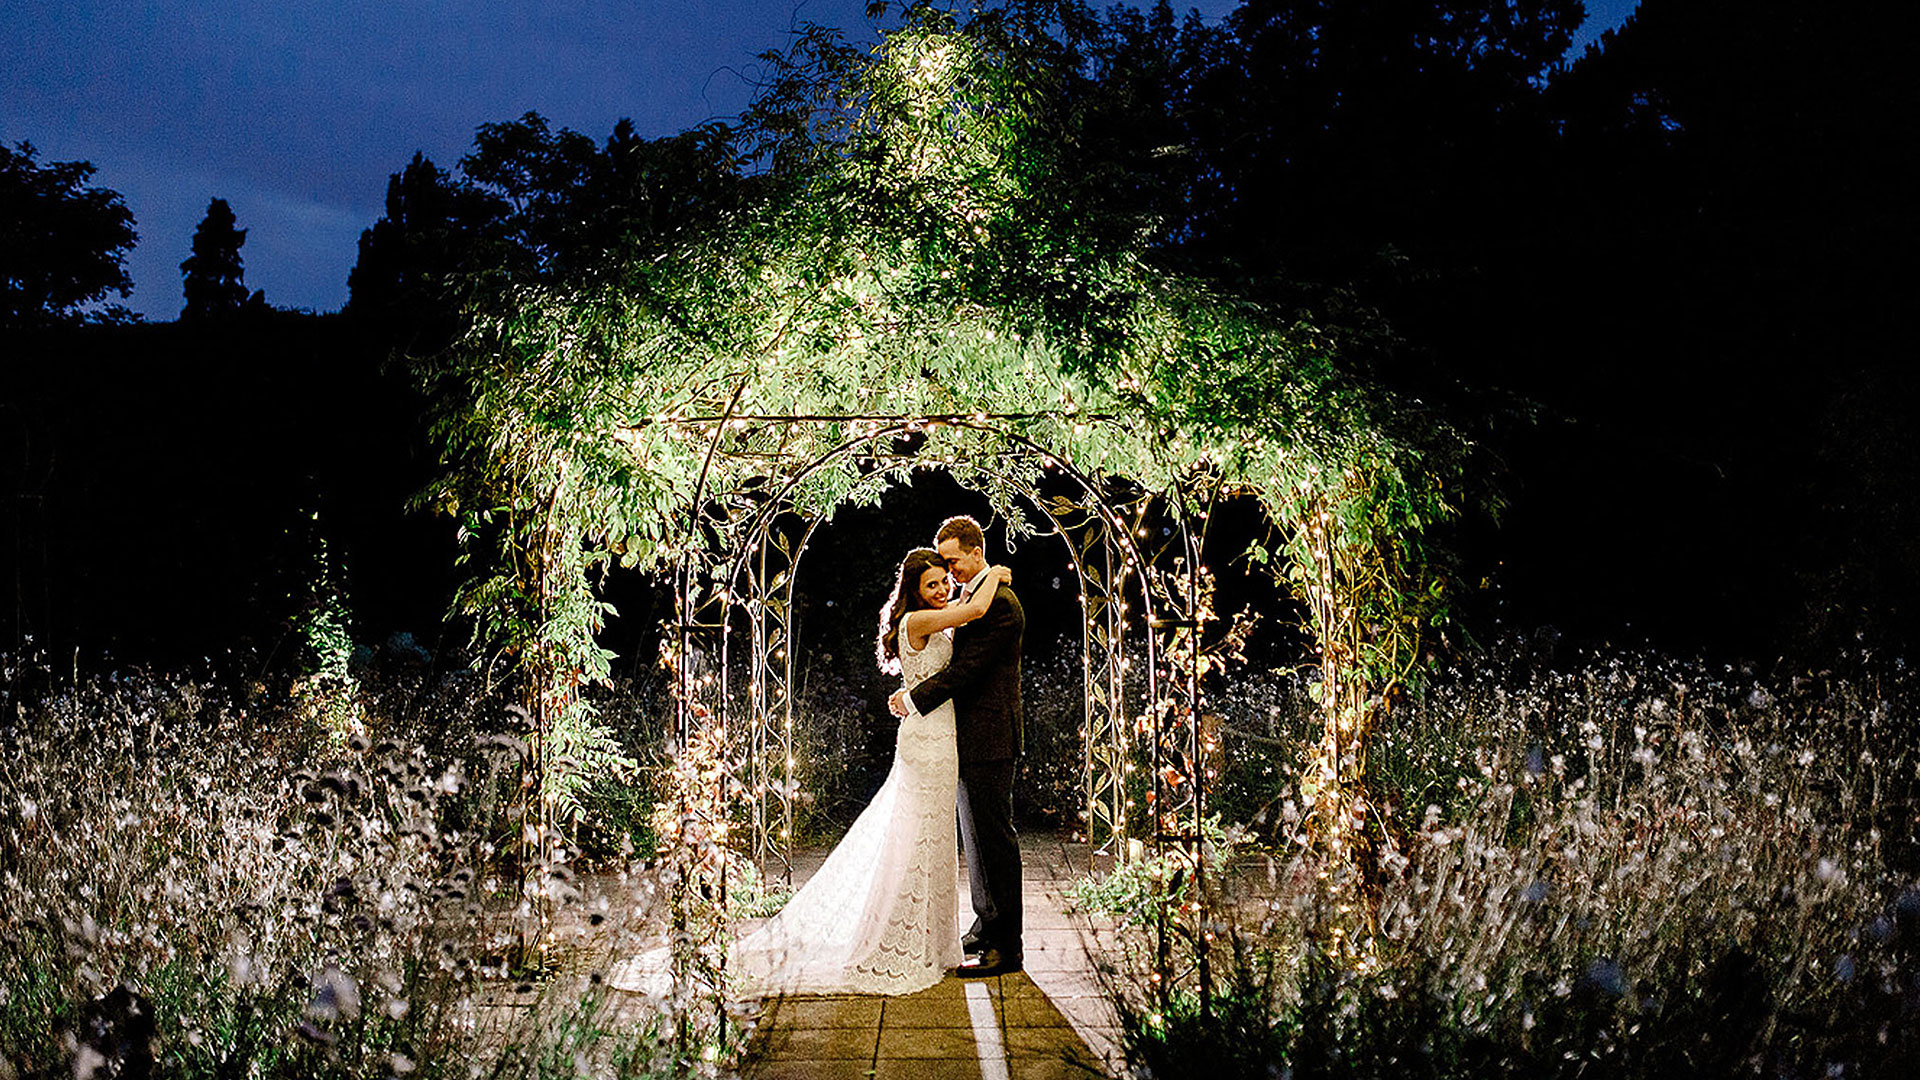 A happy couple embrace as they stand under the romantic wrought-iron pavilion at night - wedding photo ideas